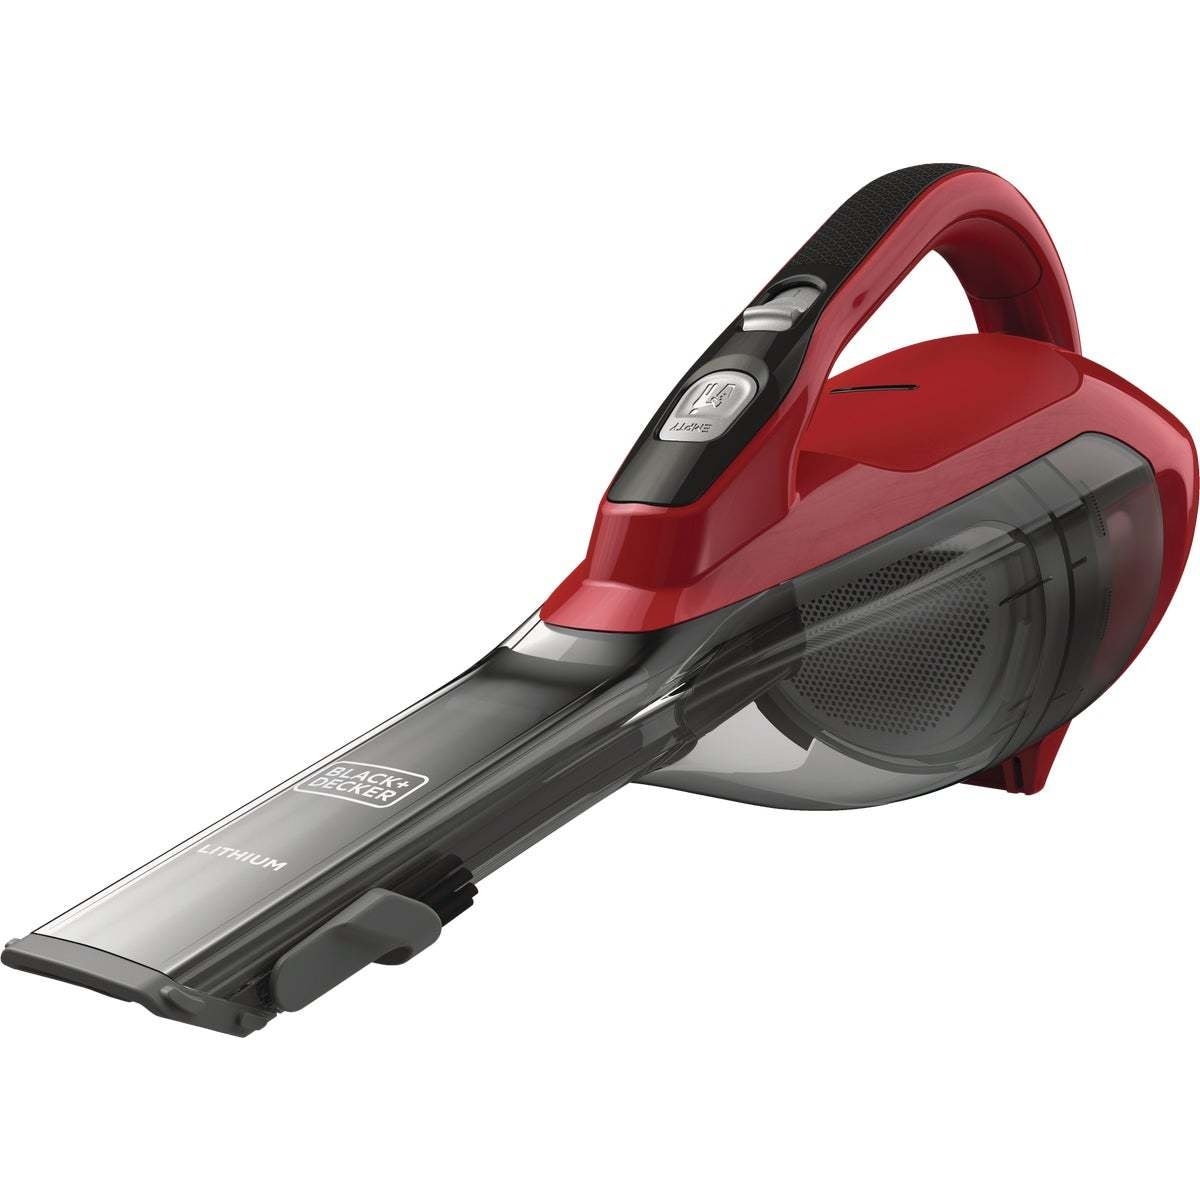 https://ak1.ostkcdn.com/images/products/is/images/direct/641aaead6b91b590442484efefd2ffb3d2a933e9/Black-%26-Decker-Dustbuster-10.8V-2.0AH-Chili-Red-Cordless-Handheld-Vacuum-Cleaner---1-Each.jpg